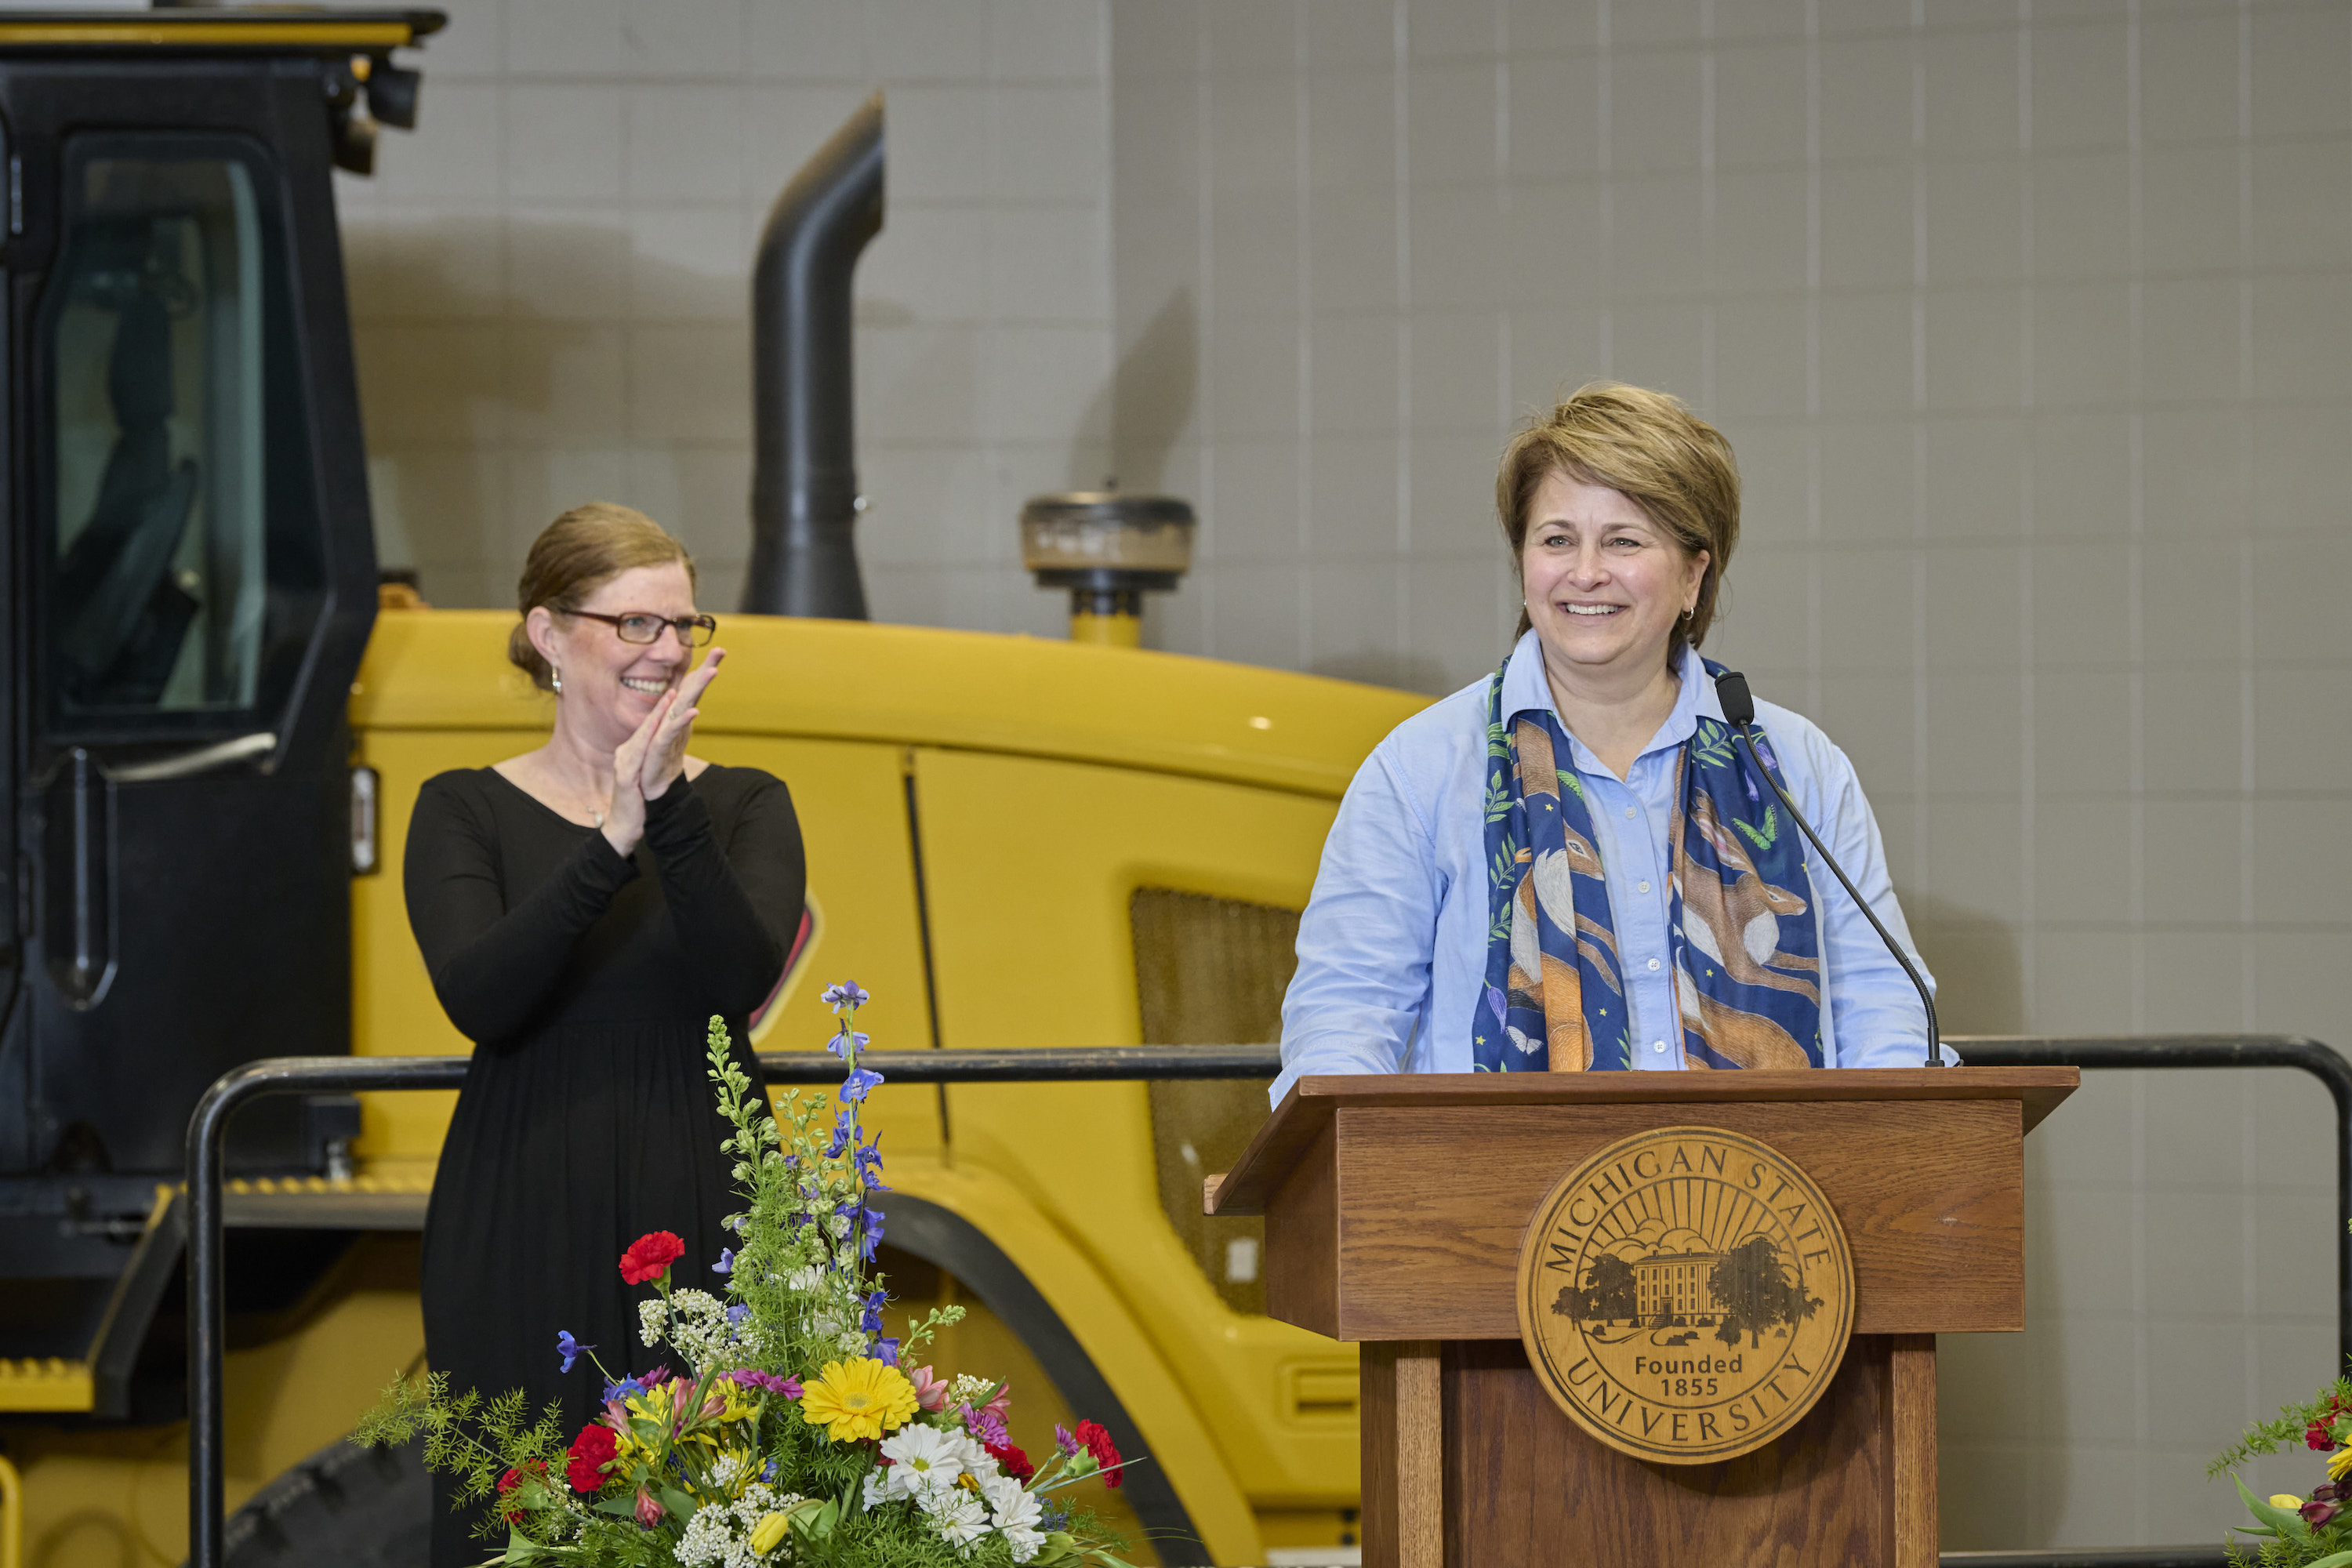 Kelly Millenbah, dean of the College of Agriculture and Natural Resources speaks at a podium with an American Sign Language interpreter standing in the background.